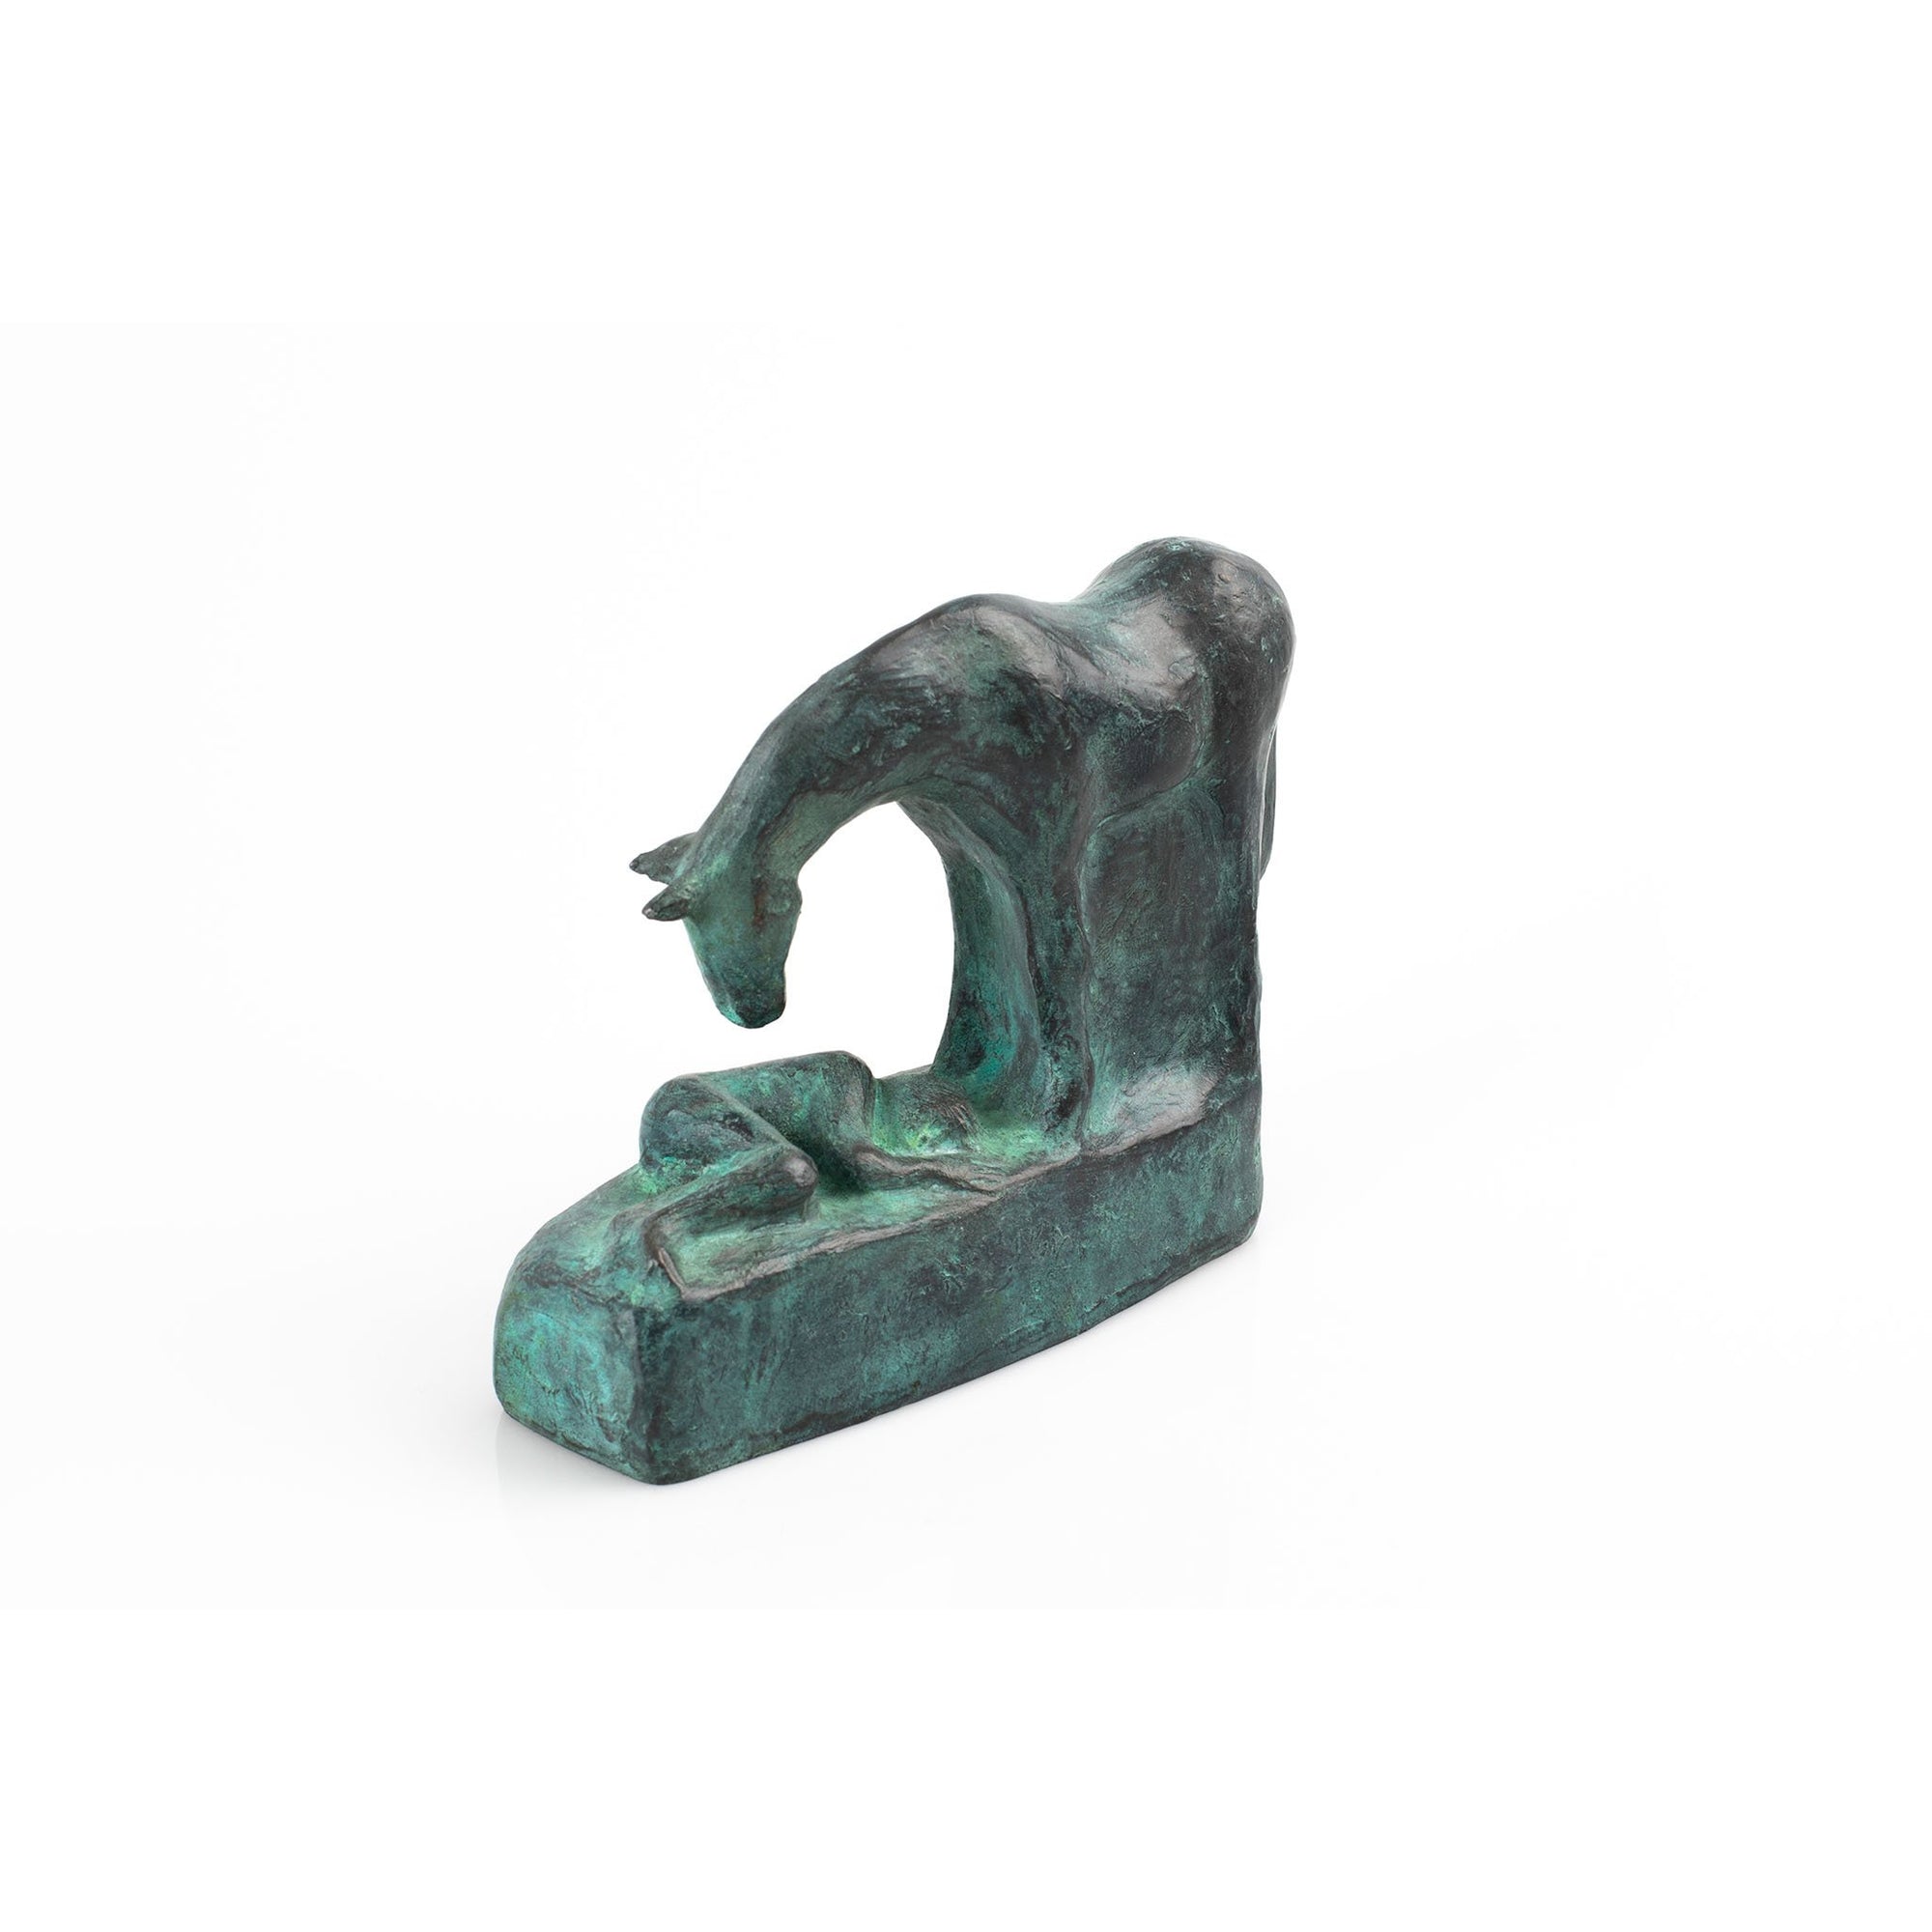 Lying open edition bronze resin sculpture by Sophie Howard, available at Padstow Gallery, Cornwall